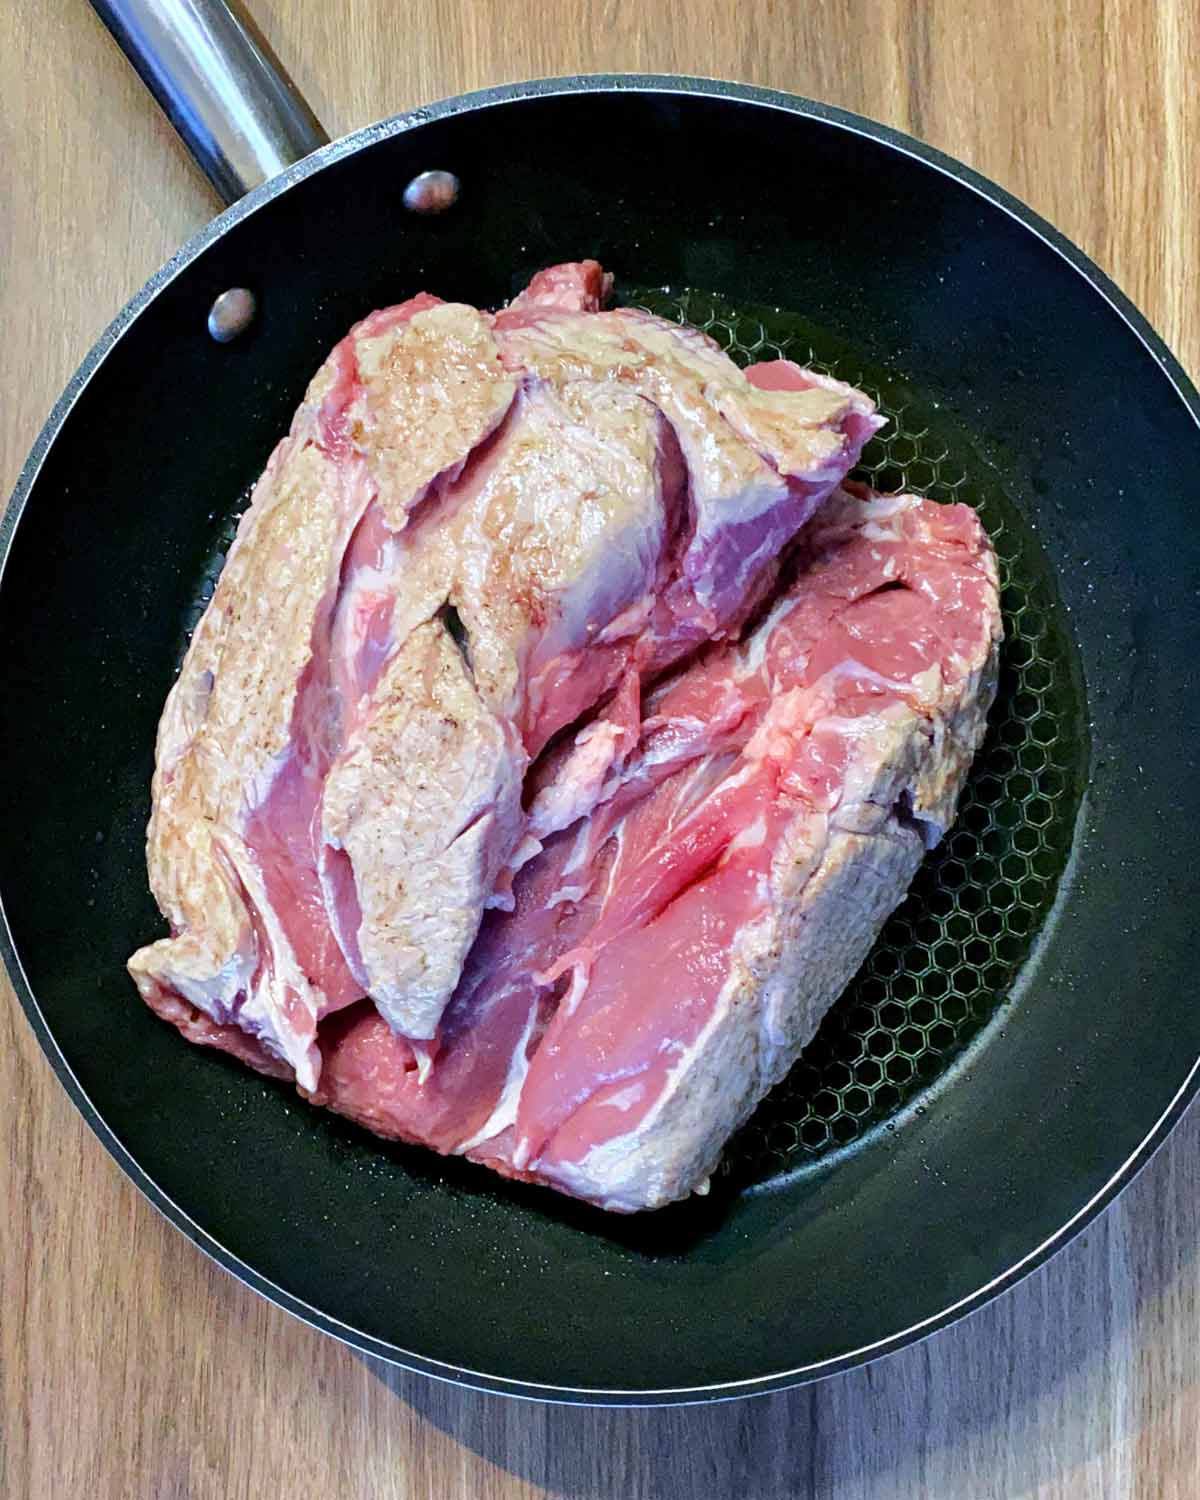 A whole lamb shoulder in a frying pan.